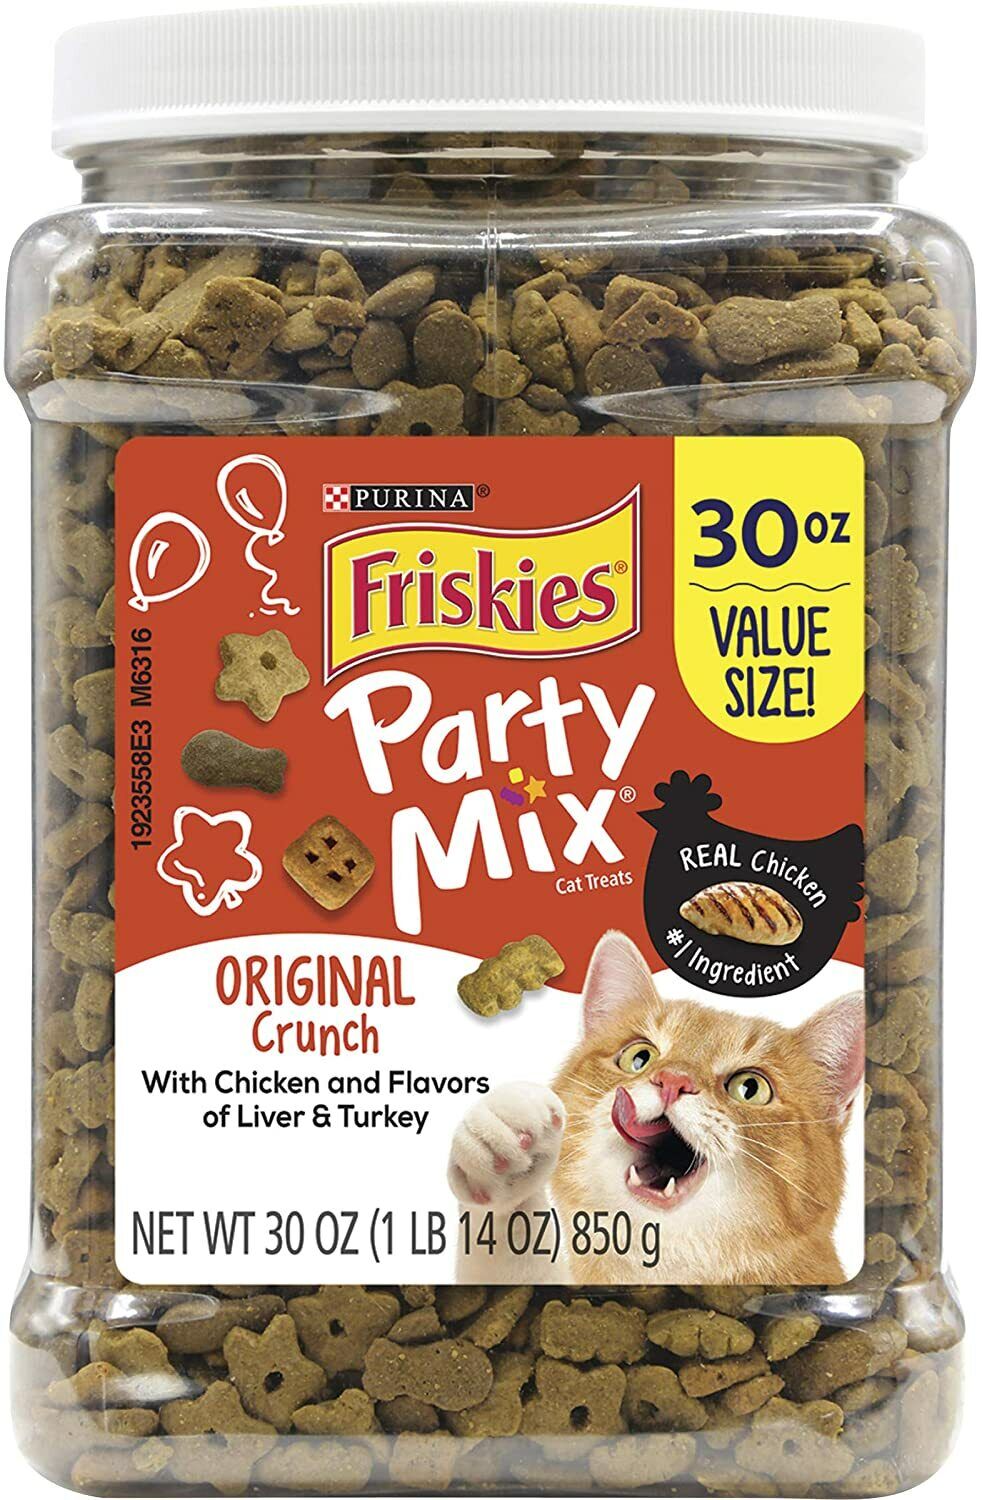 Friskies Party Mix Adult Cat Food Treats Canisters – Real Chicken 30 oz